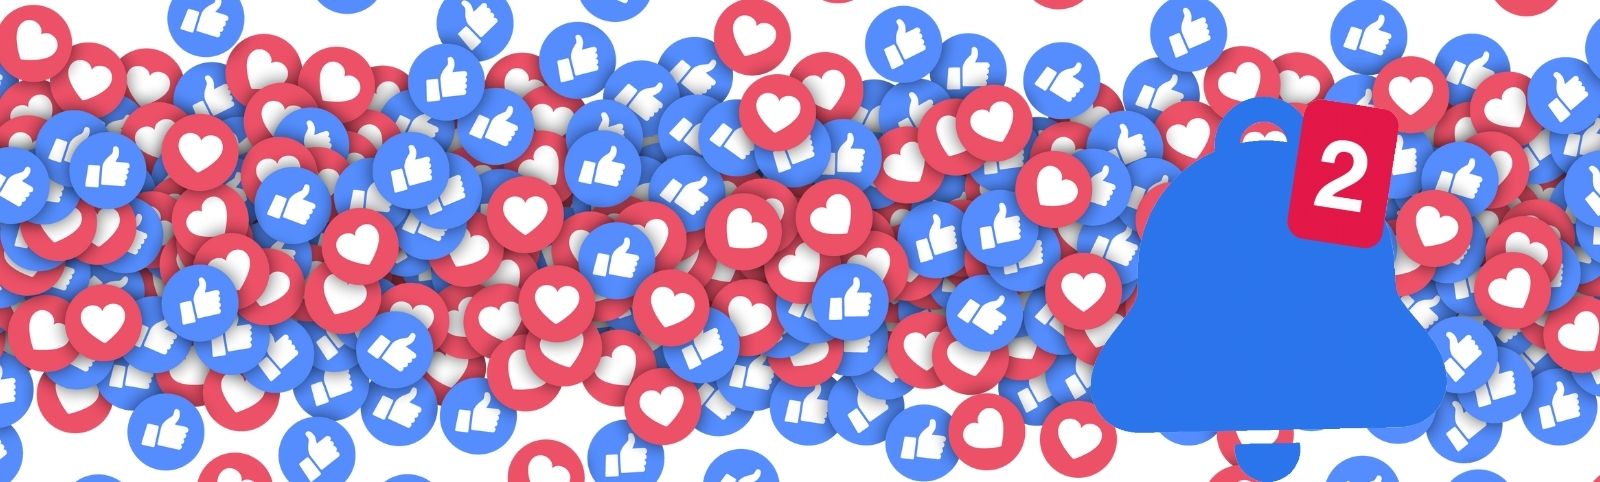 social media hearts and thumbs up all piled on top of eachother